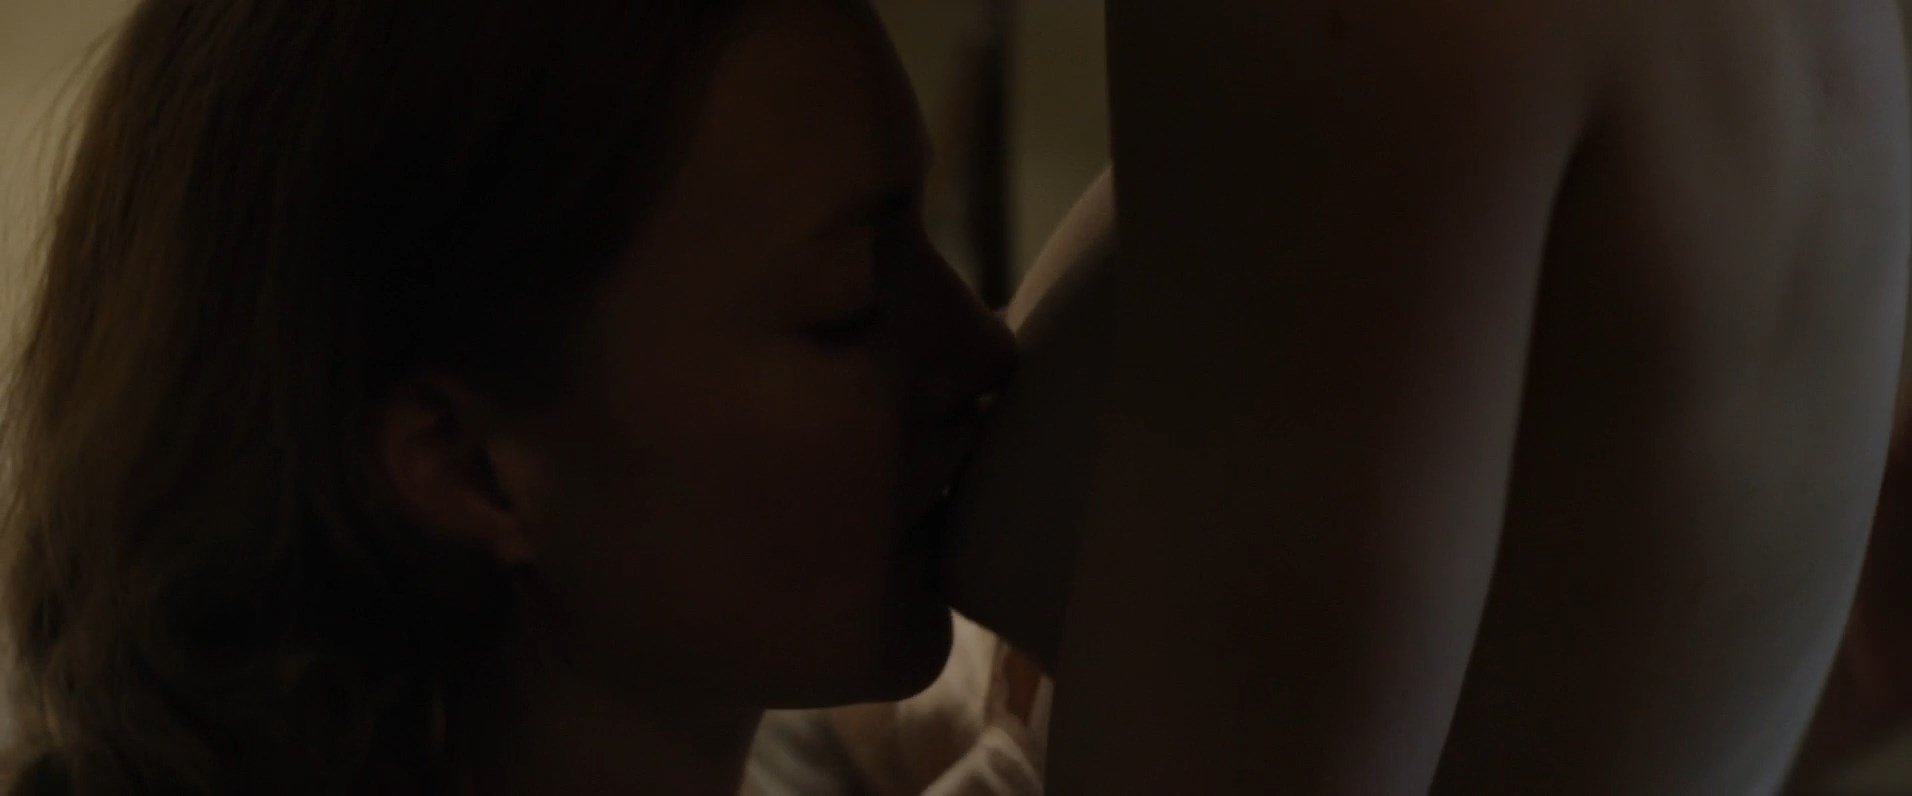 Holliday Grainger, Anna Paquin Nude - Tell It to the Bees (14 Pics + GIFs & Video)